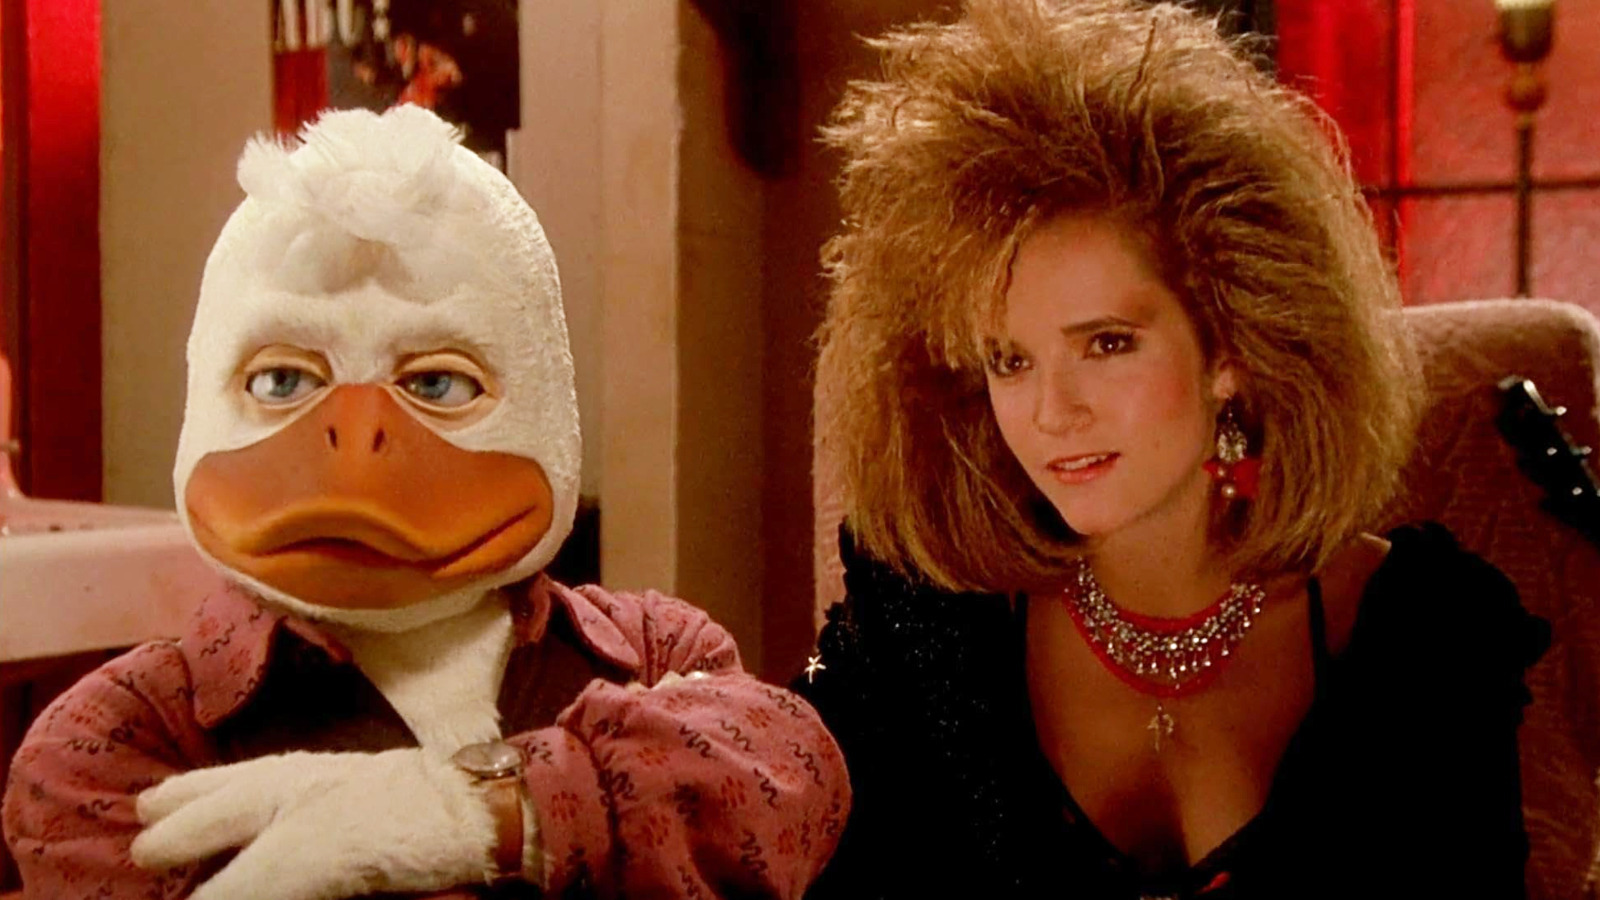 Howard The Duck Isn’t The First Marvel Comics Movie – The Real One Came Out One Year Earlier